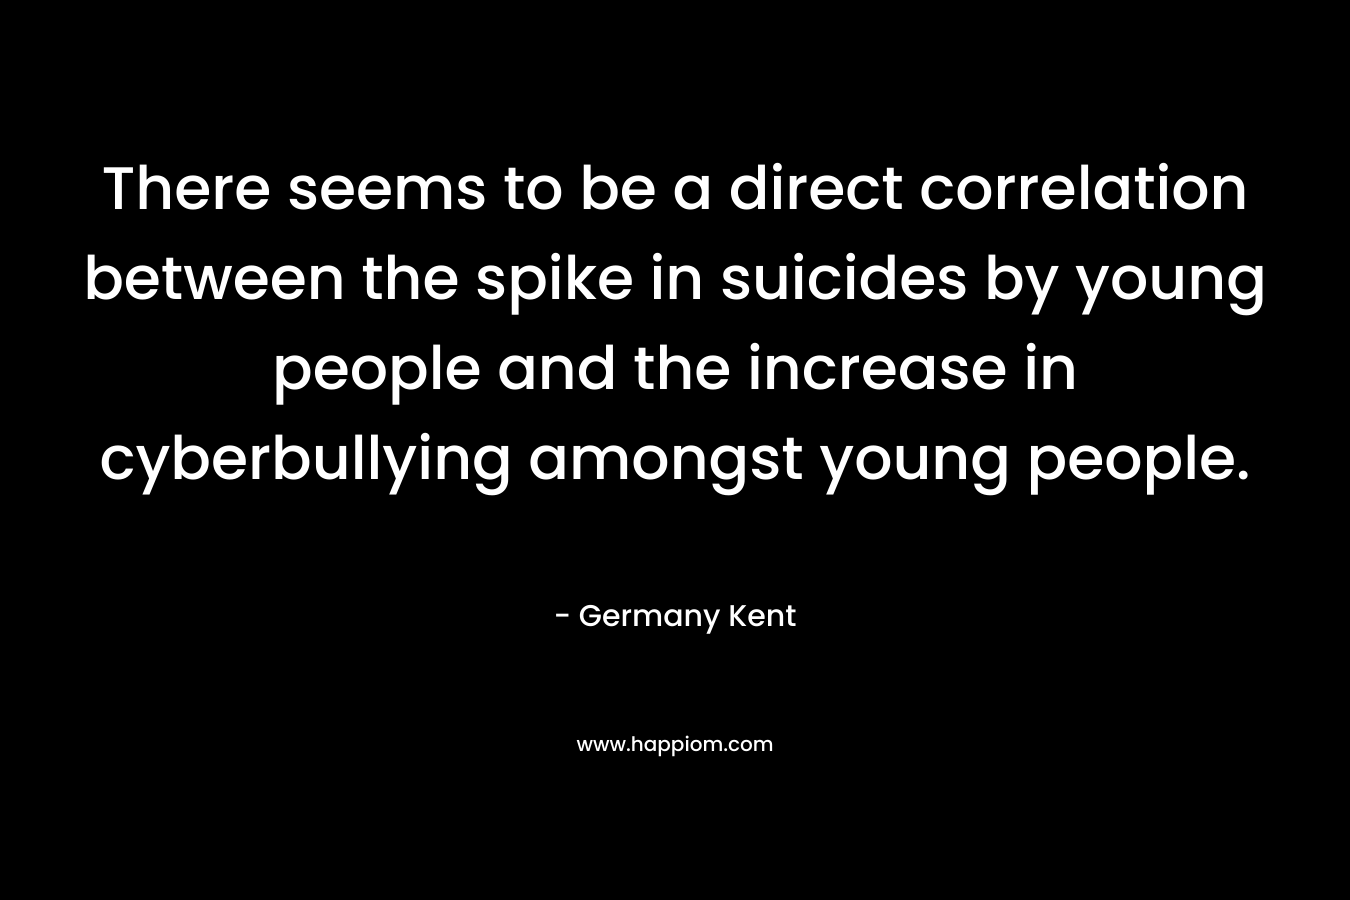 There seems to be a direct correlation between the spike in suicides by young people and the increase in cyberbullying amongst young people.